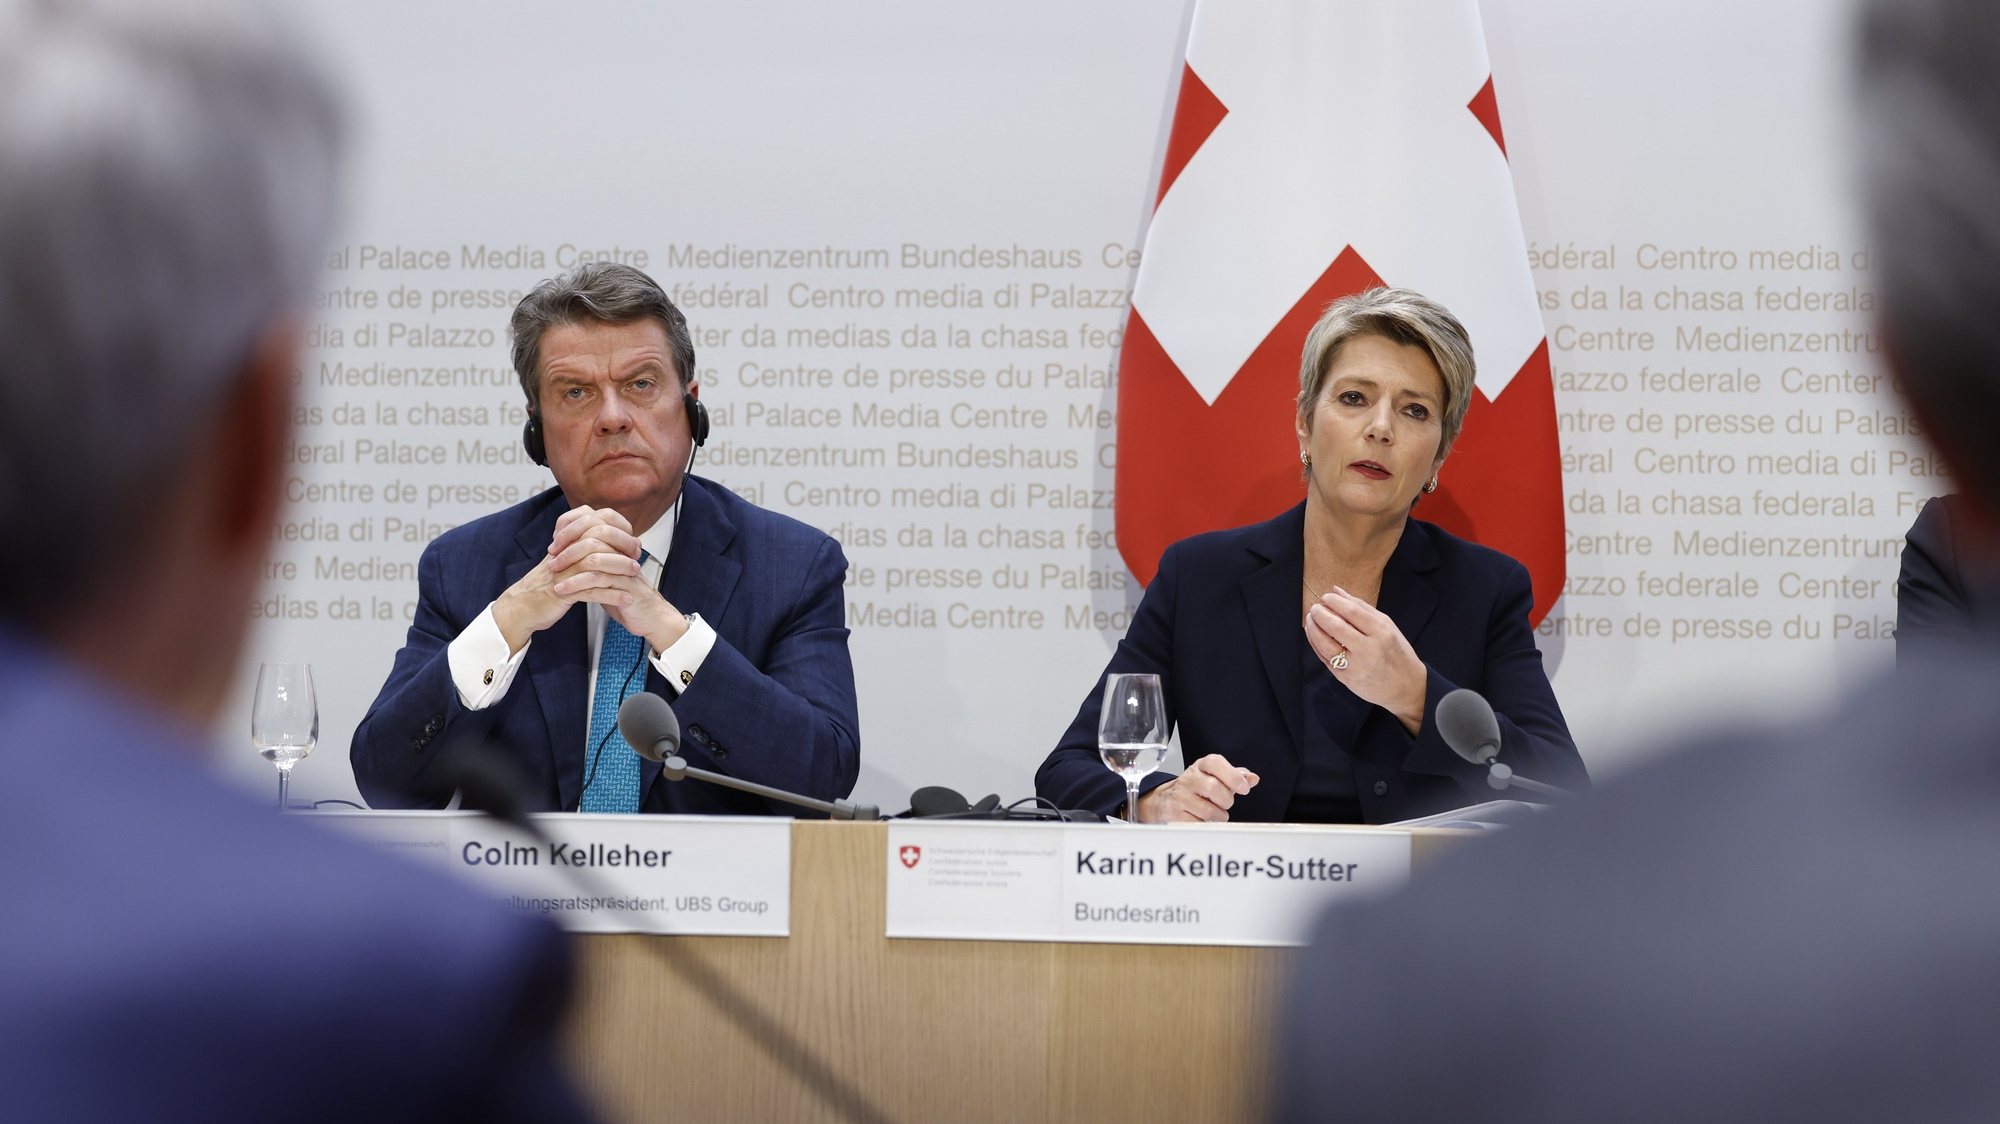 epa10532774 Swiss Finance Minister Karin Keller-Sutter (R), speaks next to Colm Kelleher (L), Chairman UBS, during a press conference in Bern, Switzerland, 19 March 2023. The bank UBS takes over Credit Suisse for 2 billion US dollars. Shares of Credit Suisse lost more than one-quarter of their value on 15 March 2023, hitting a record low after its biggest shareholder, the Saudi National Bank, told outlets that it would not inject more money into the ailing Swiss bank.  EPA/PETER KLAUNZER